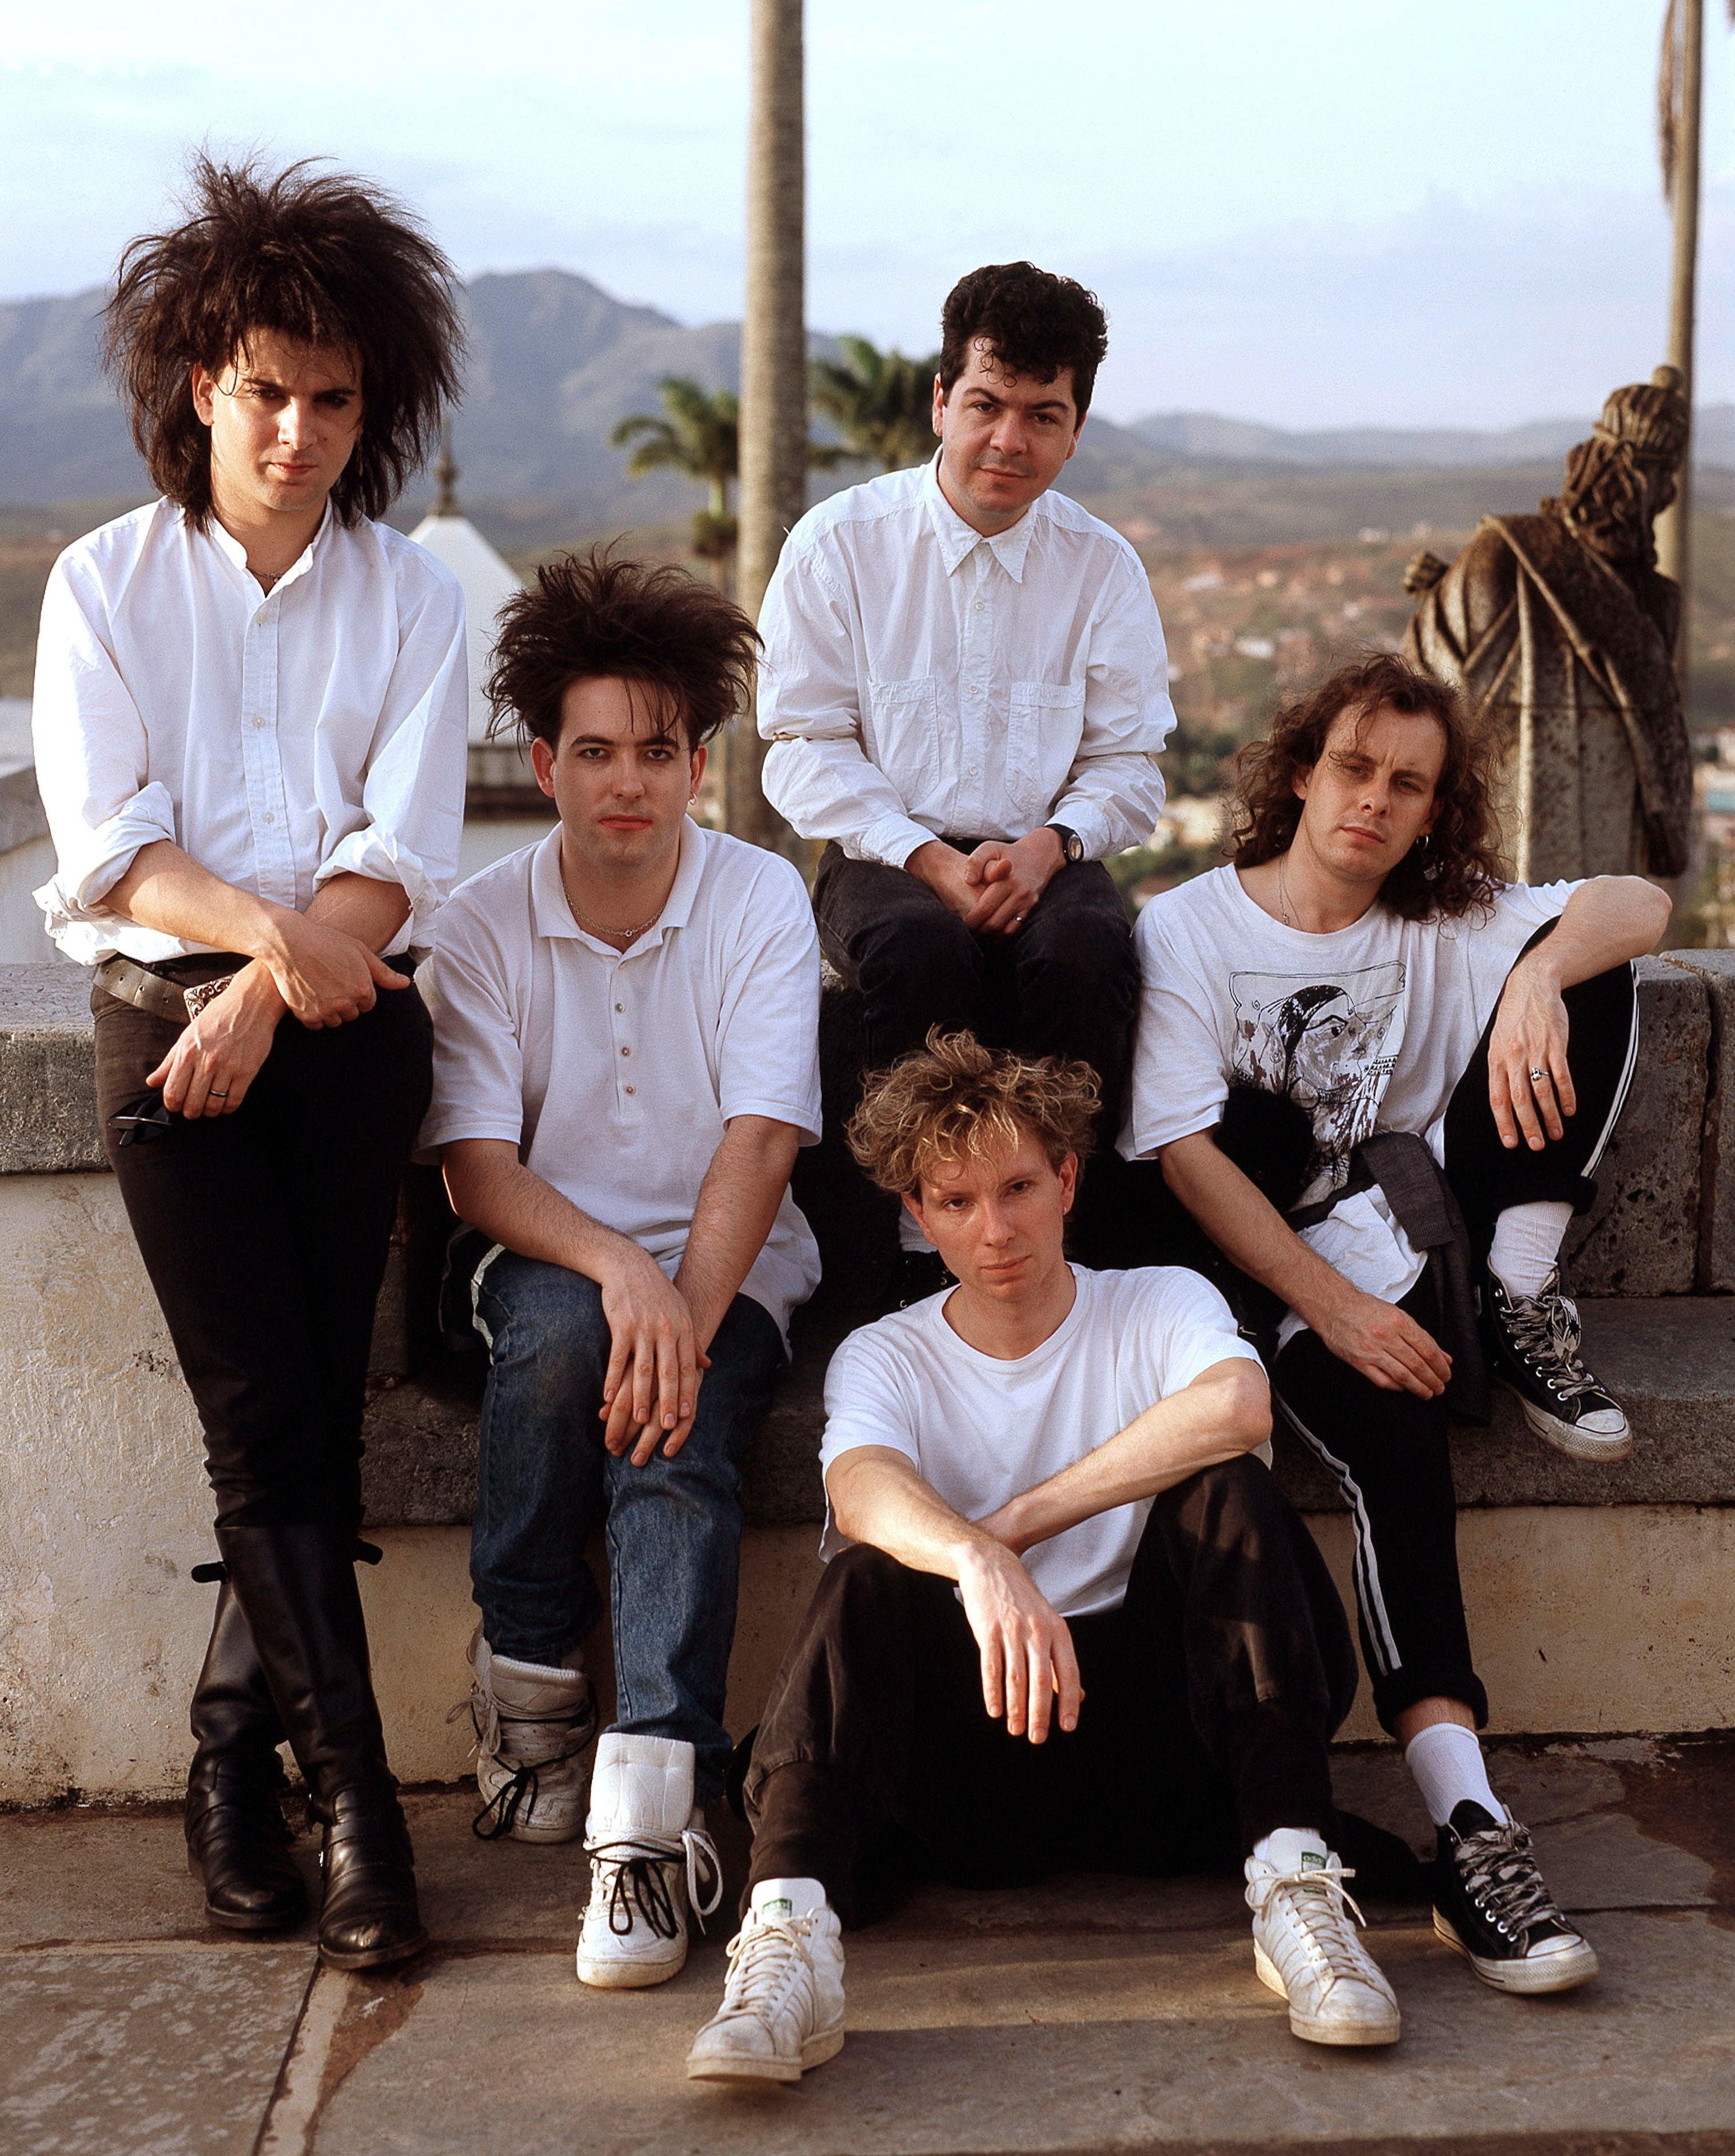 The Cure: Our 1988 Cover Story on Robert Smith